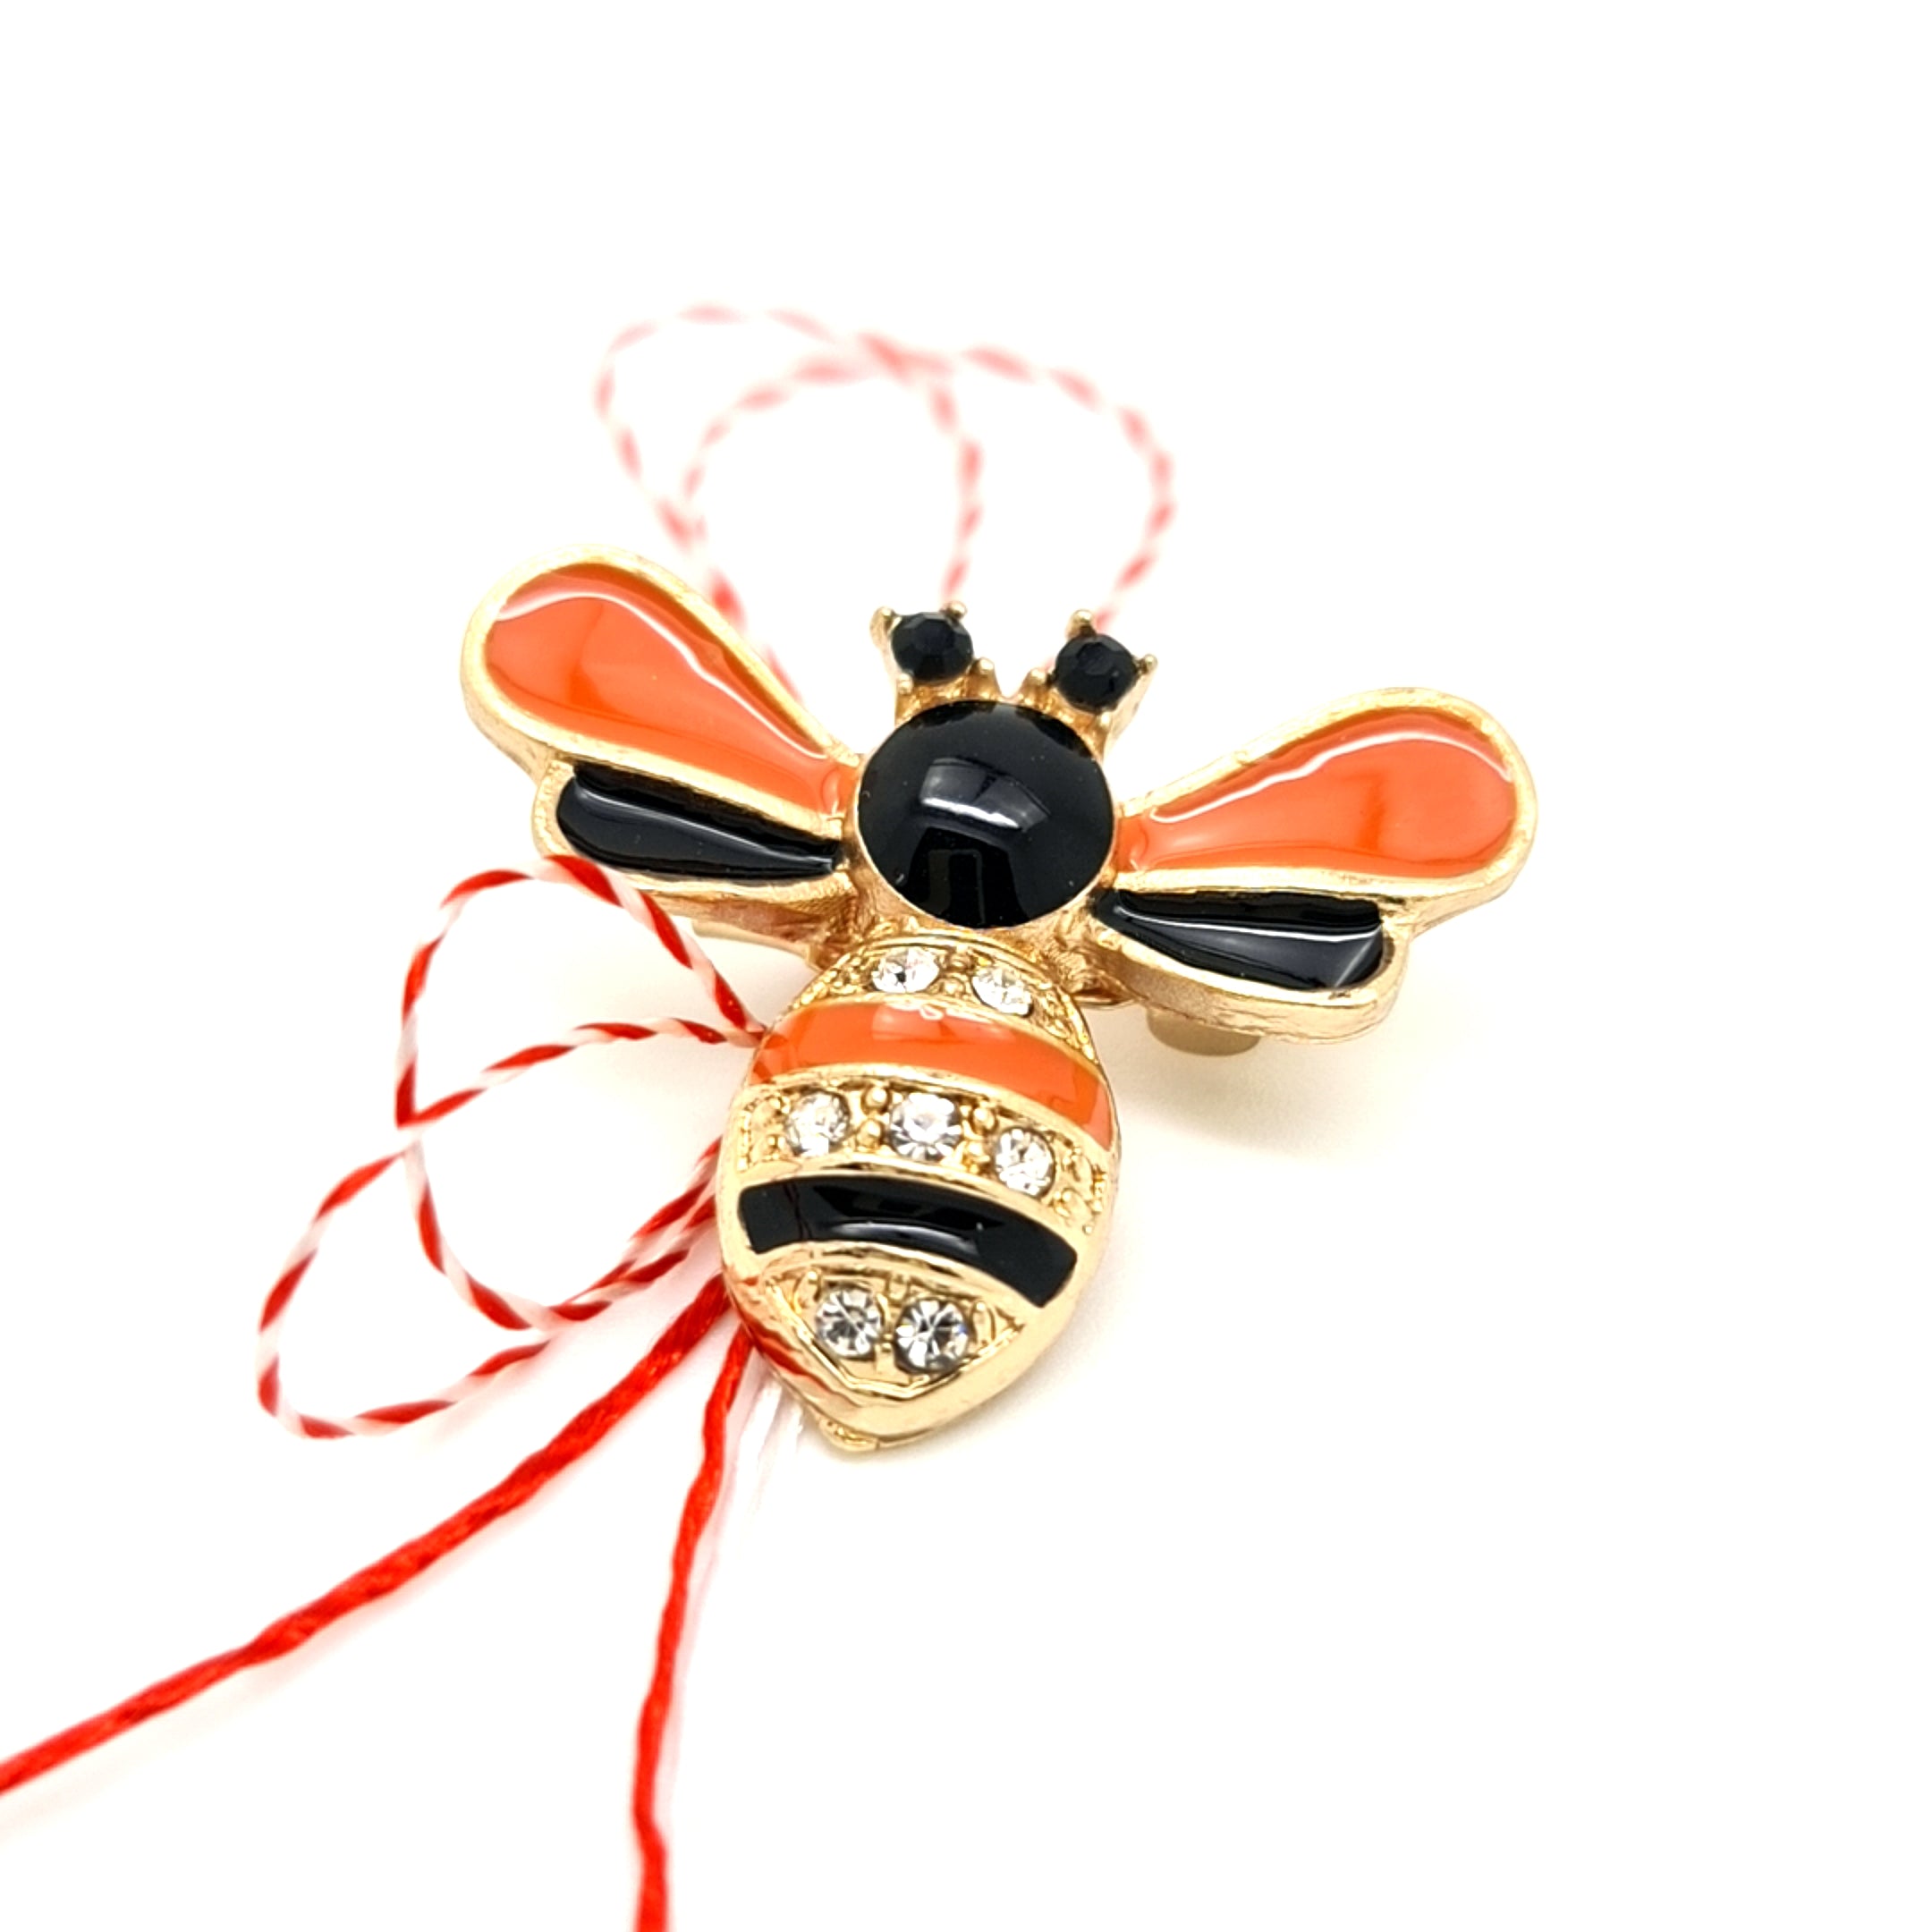 Enamel Bumblebee Martisor Brooch in Orange with Gold Plating and Crystal Details, Tied with Red and White Martisor String.